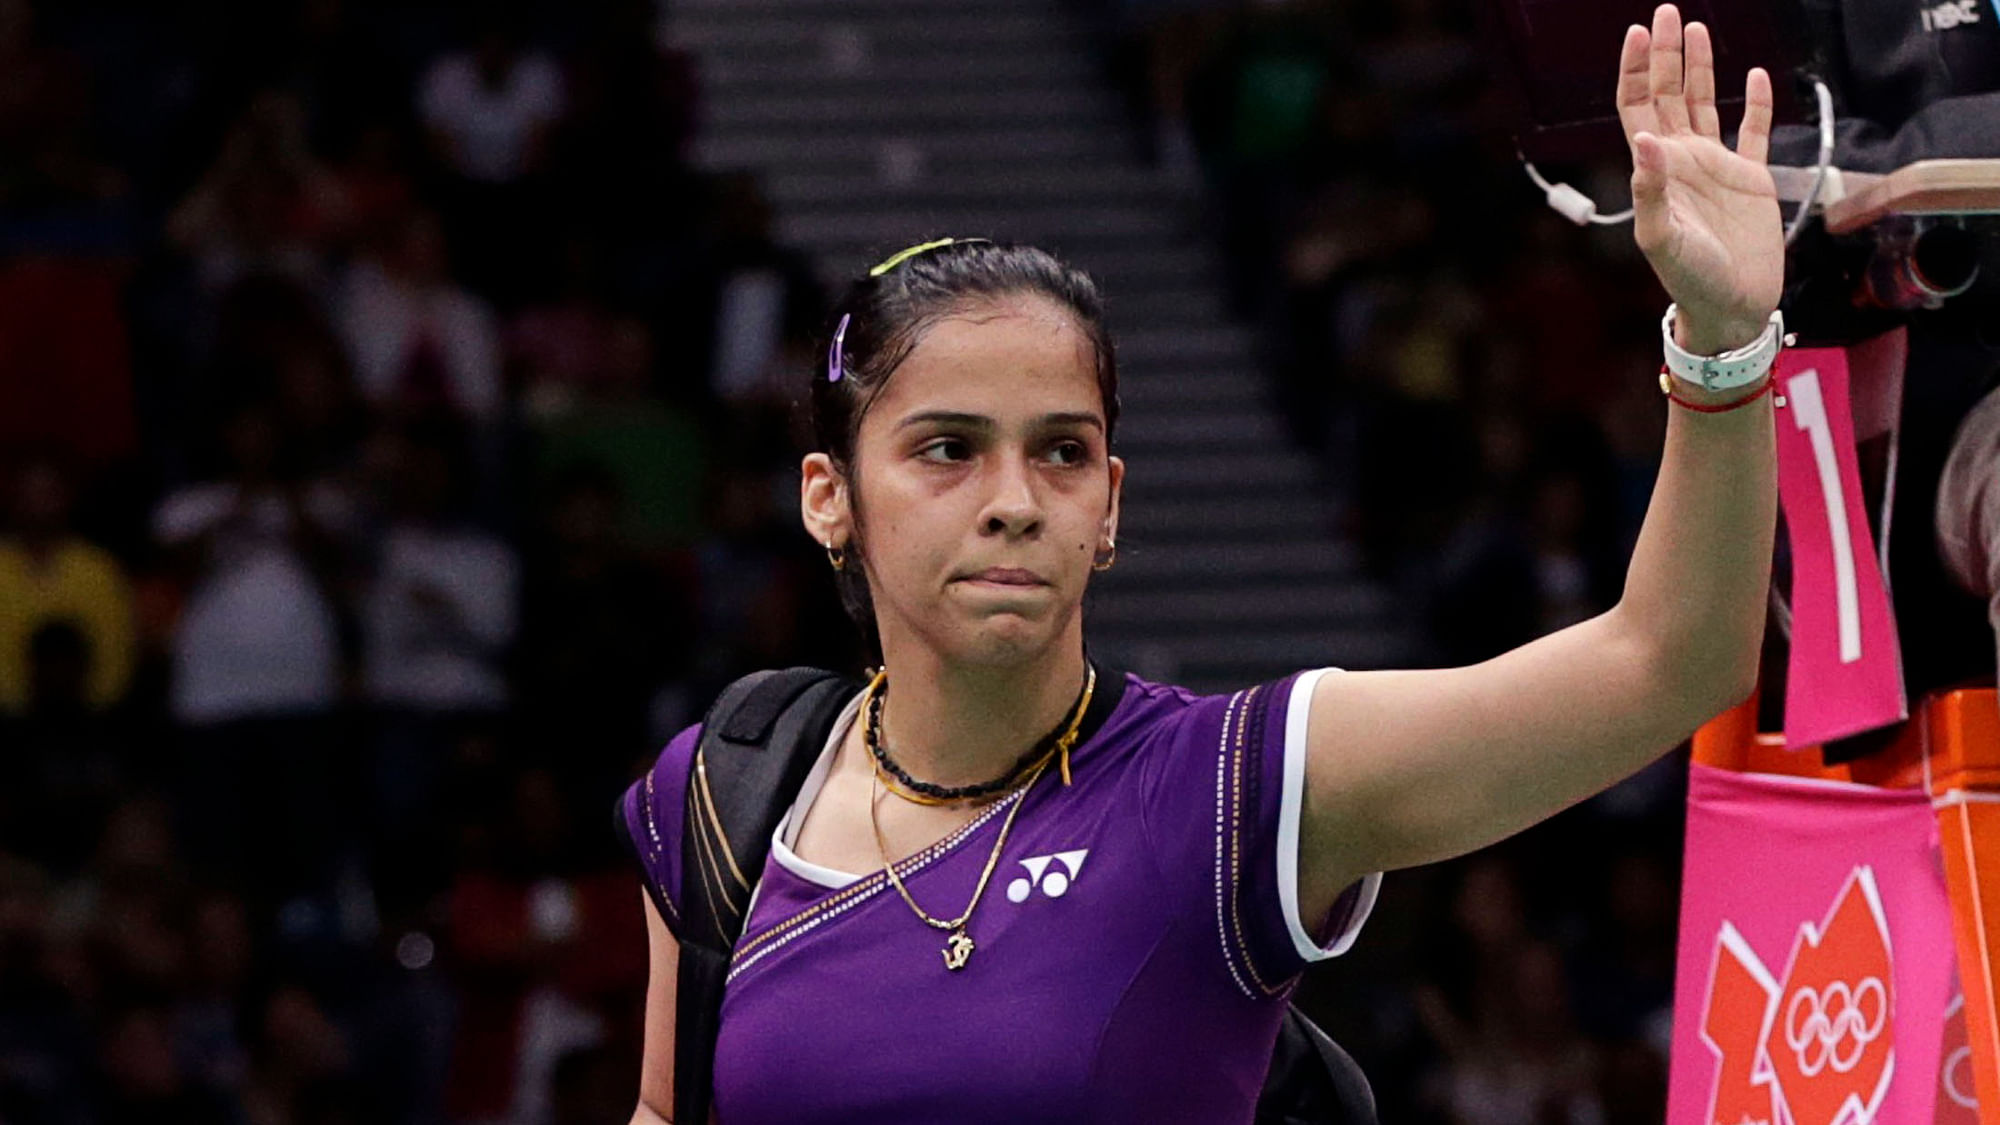 Indian shuttler Saina Nehwal knocked out of the Singapore Open after losing to Nozomi Okuhara in the quarter-final.